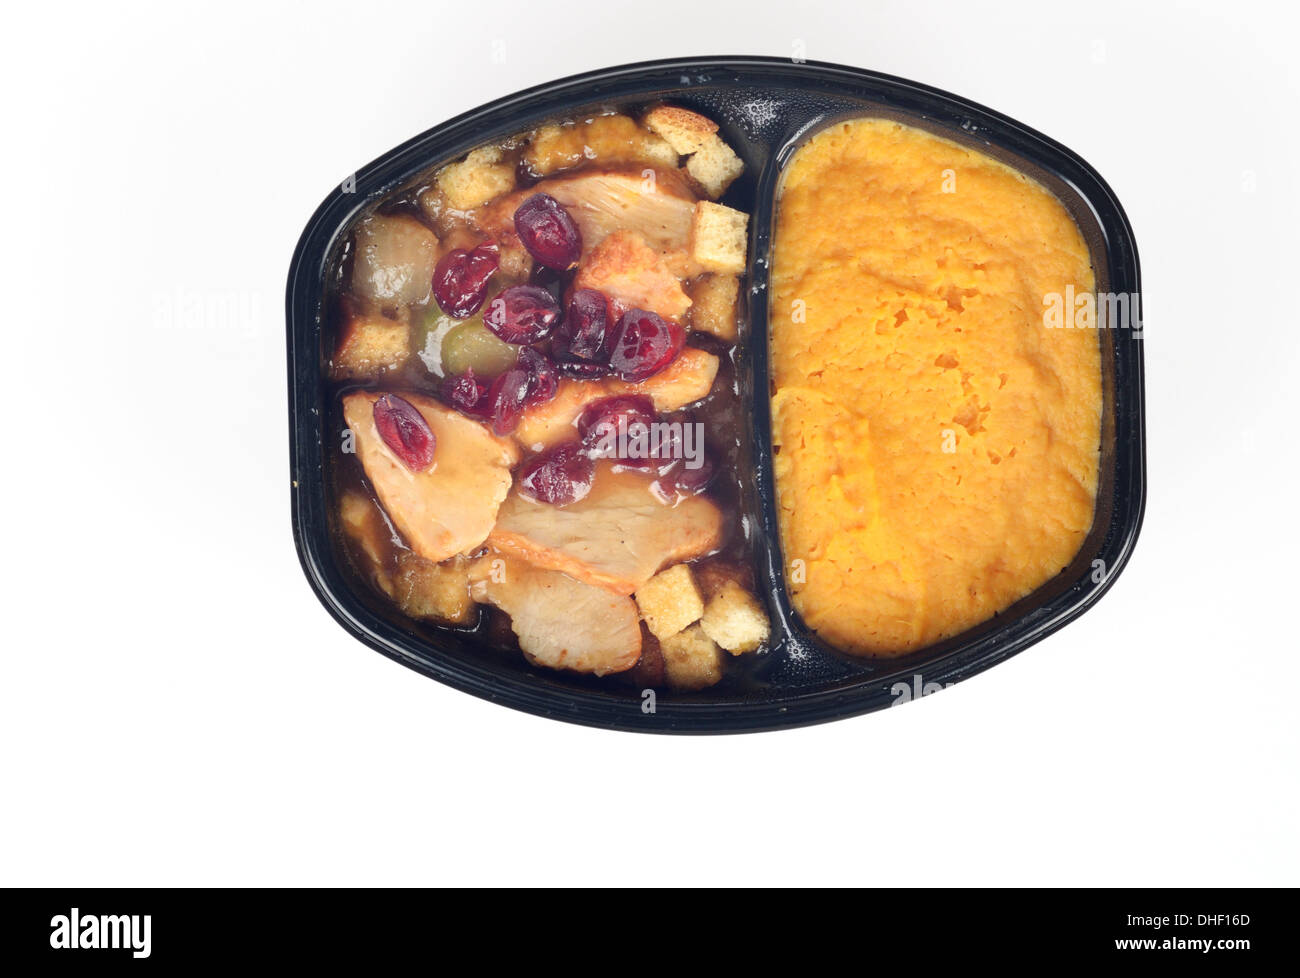 Microwave cooked hot tv dinner of turkey, stuffing, cranberries and gravy with butternut squash isolated on white background Stock Photo